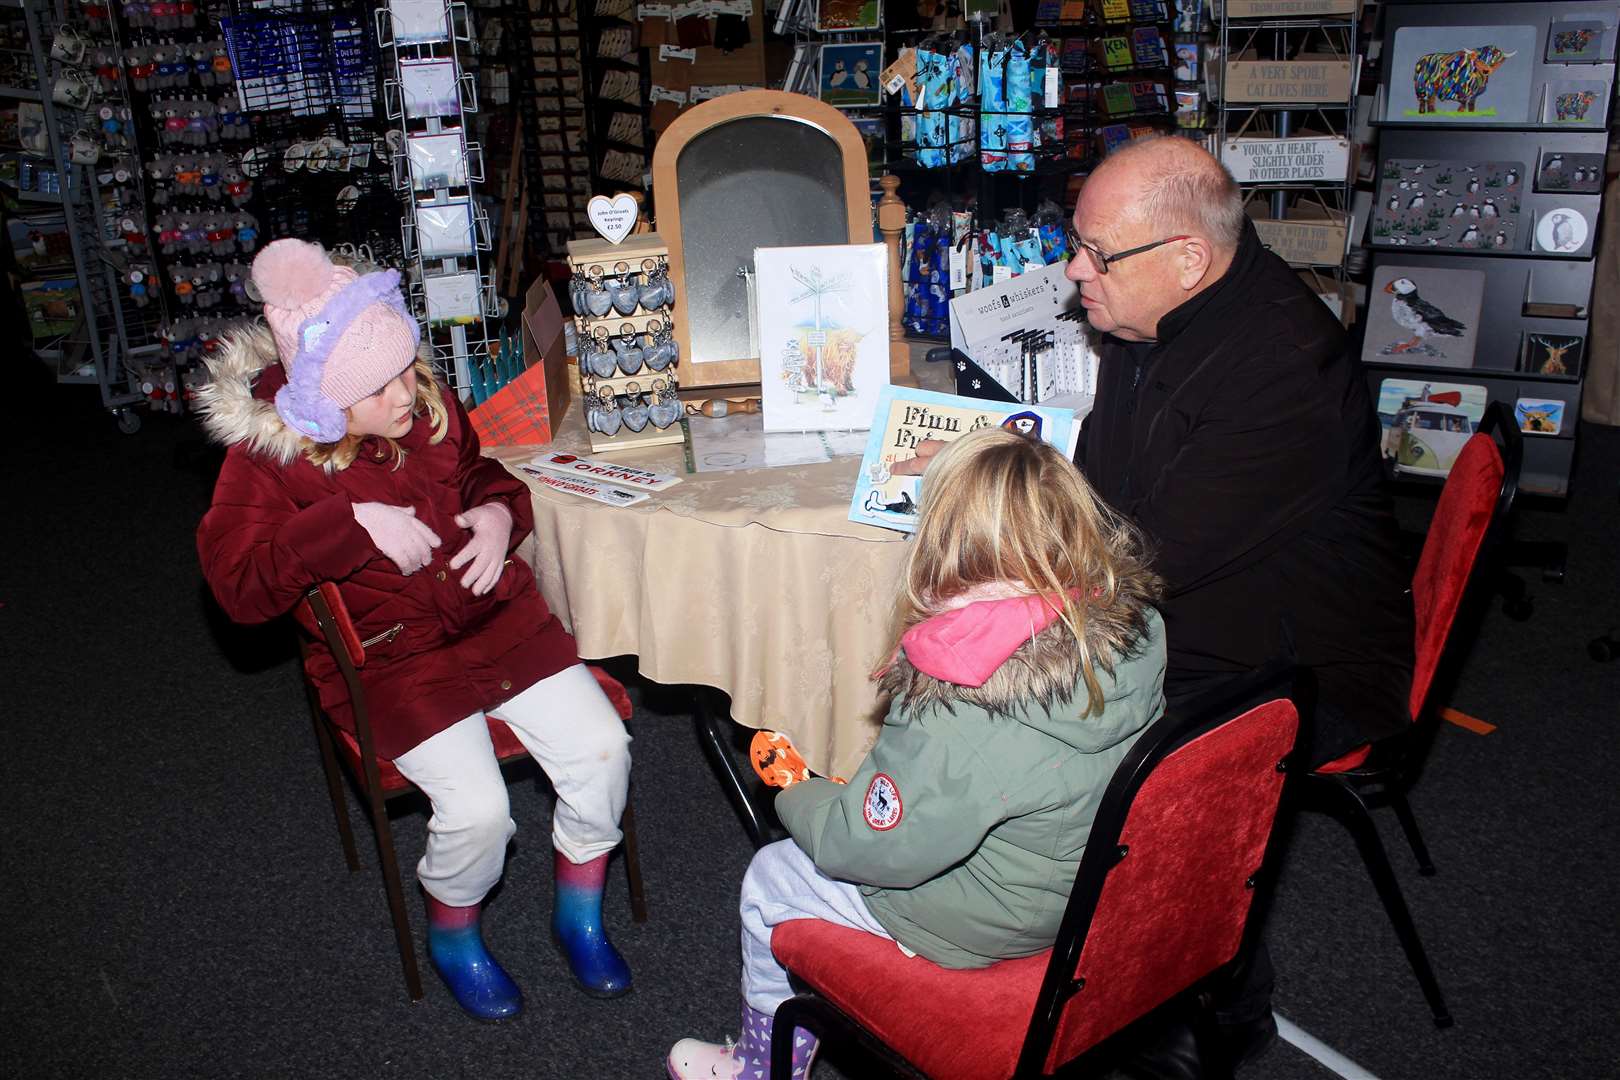 Ian Leith reading the John O'Groats children's book Finn and Friends to young visitors Olivia (8) and Frankie (5) at the Groatie Buckie Gift Shop.